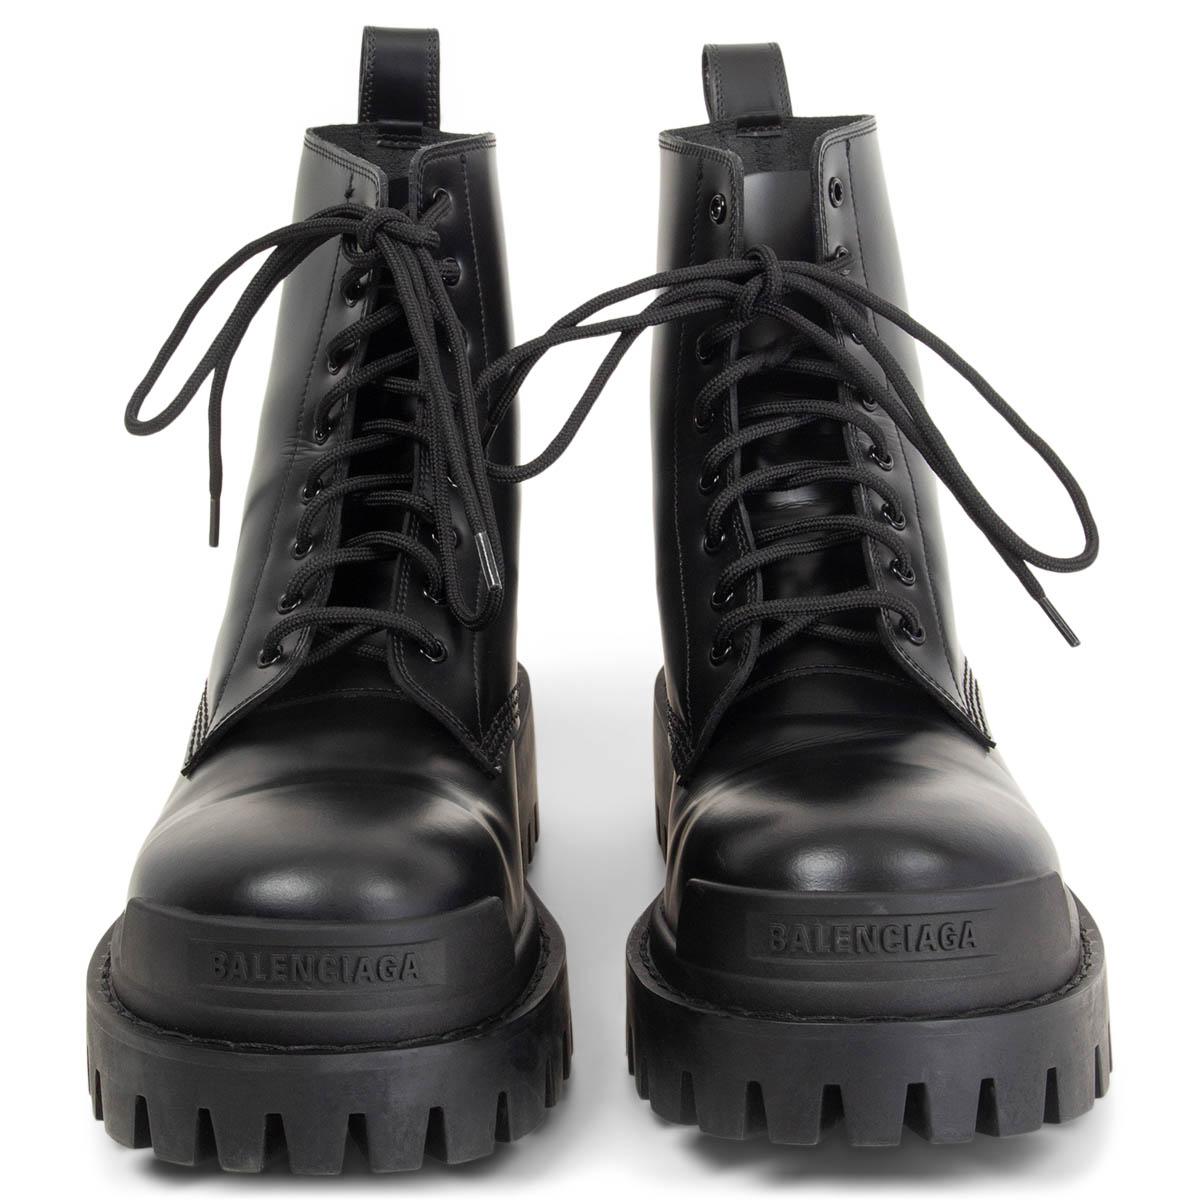 100% authentic Balenciaga lace-up Strike Combat Boots in black polished calfskin featuring a chunky rubber sole and pull tab at the back. Have been worn once and are in excellent condition. 

Measurements
Imprinted Size	38.5
Shoe Size	38.5
Inside